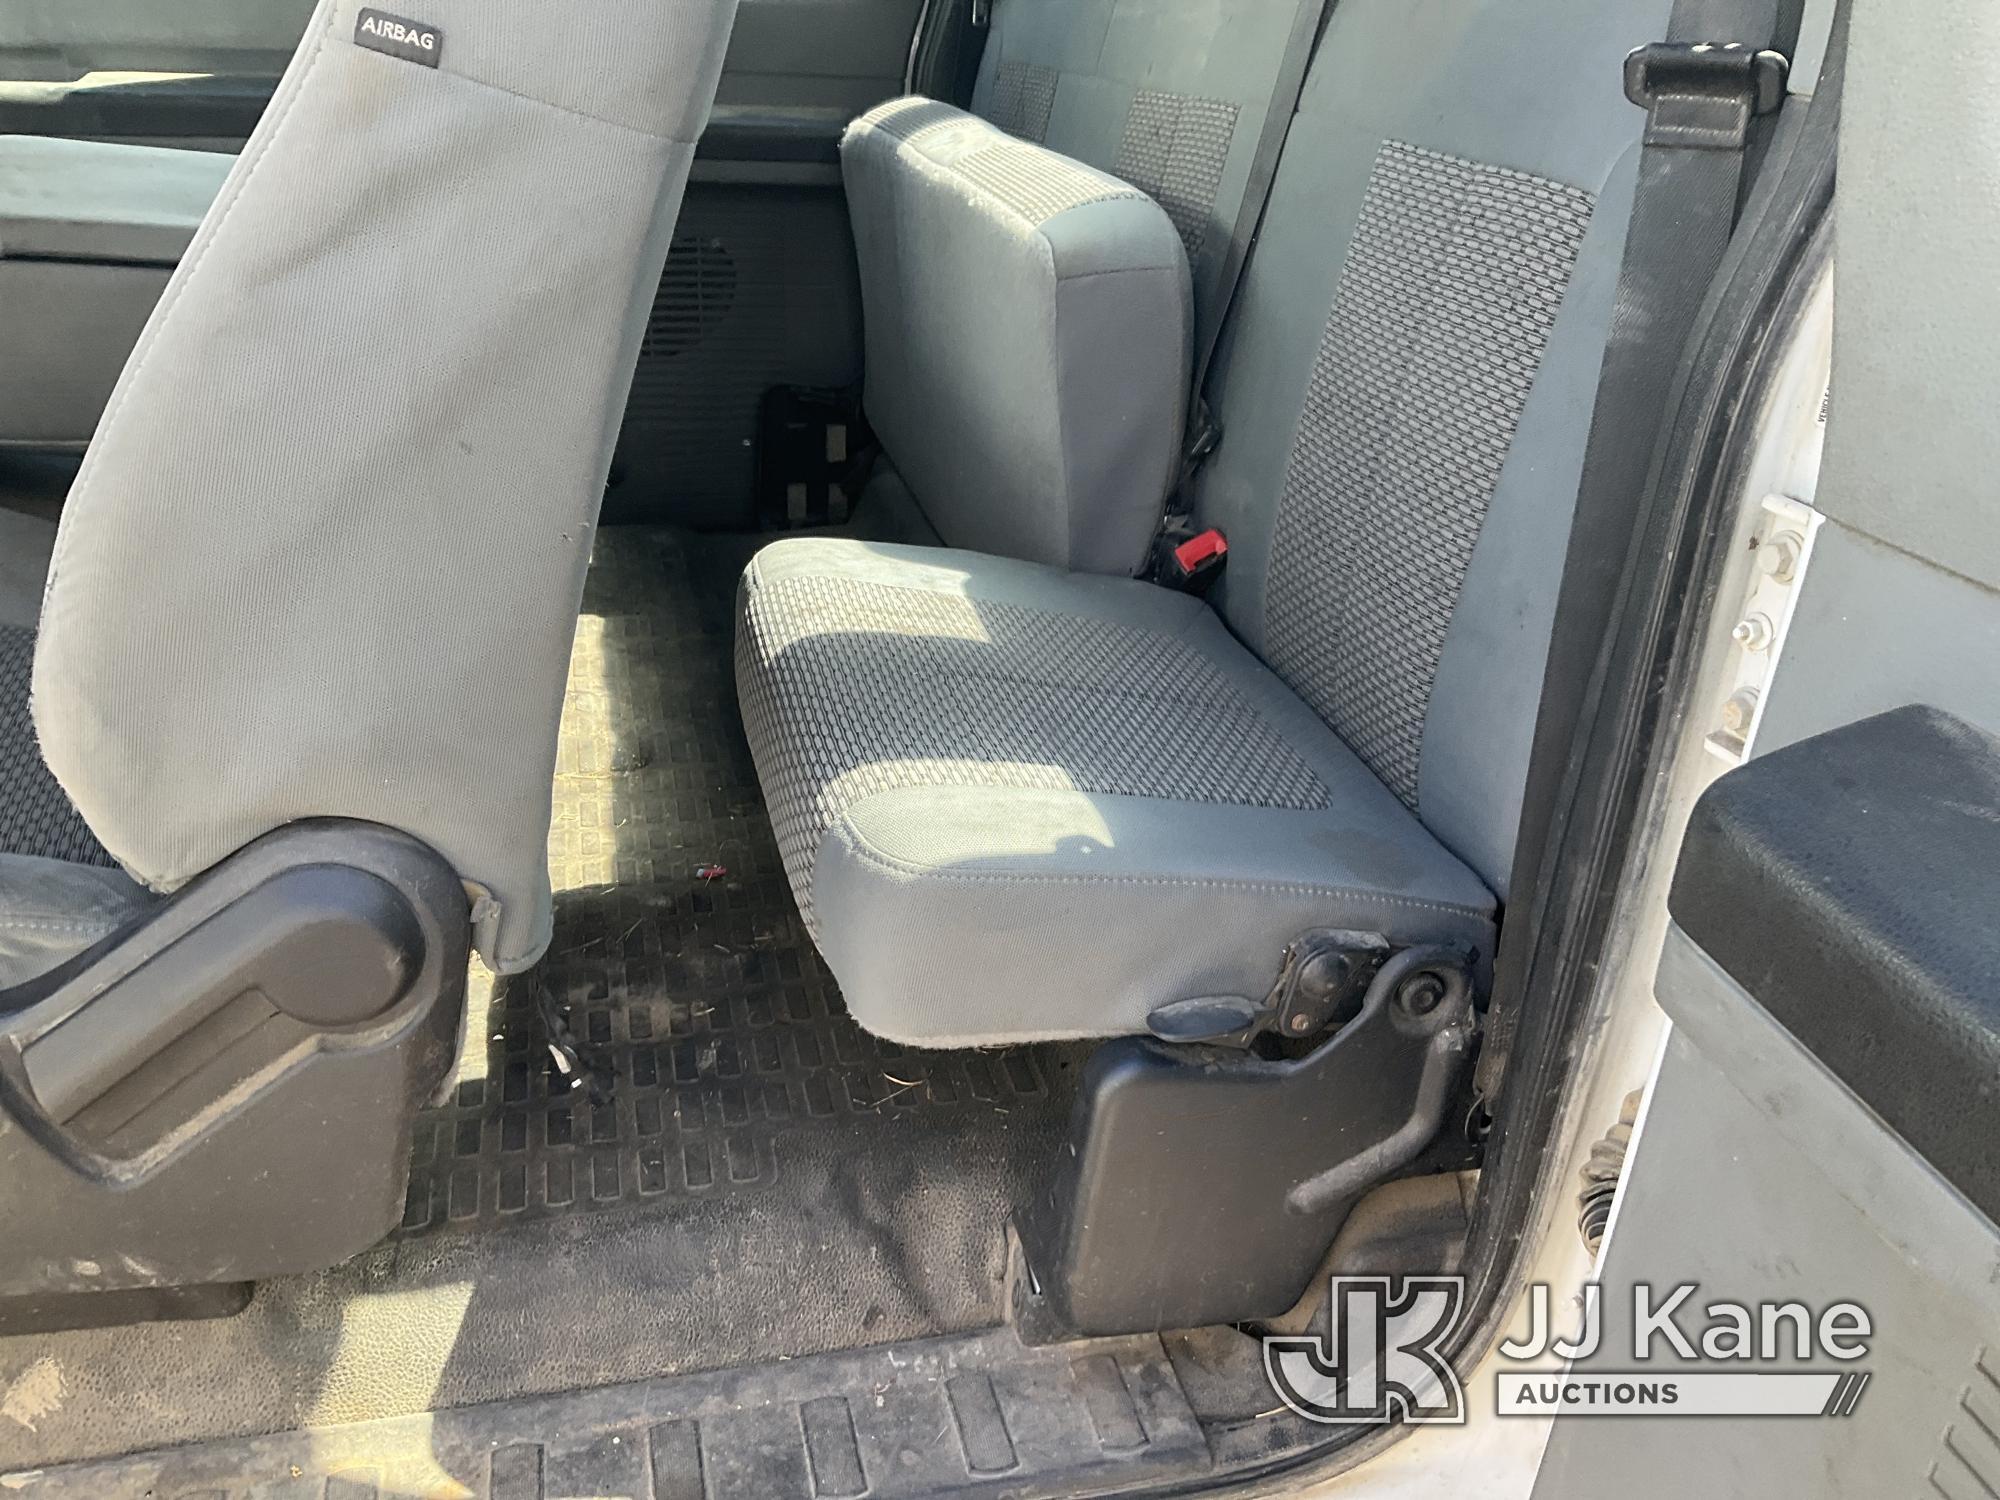 (Kansas City, MO) 2015 Ford F550 4x4 Extended-Cab Flatbed Truck Not Running, Condition Unknown, Has